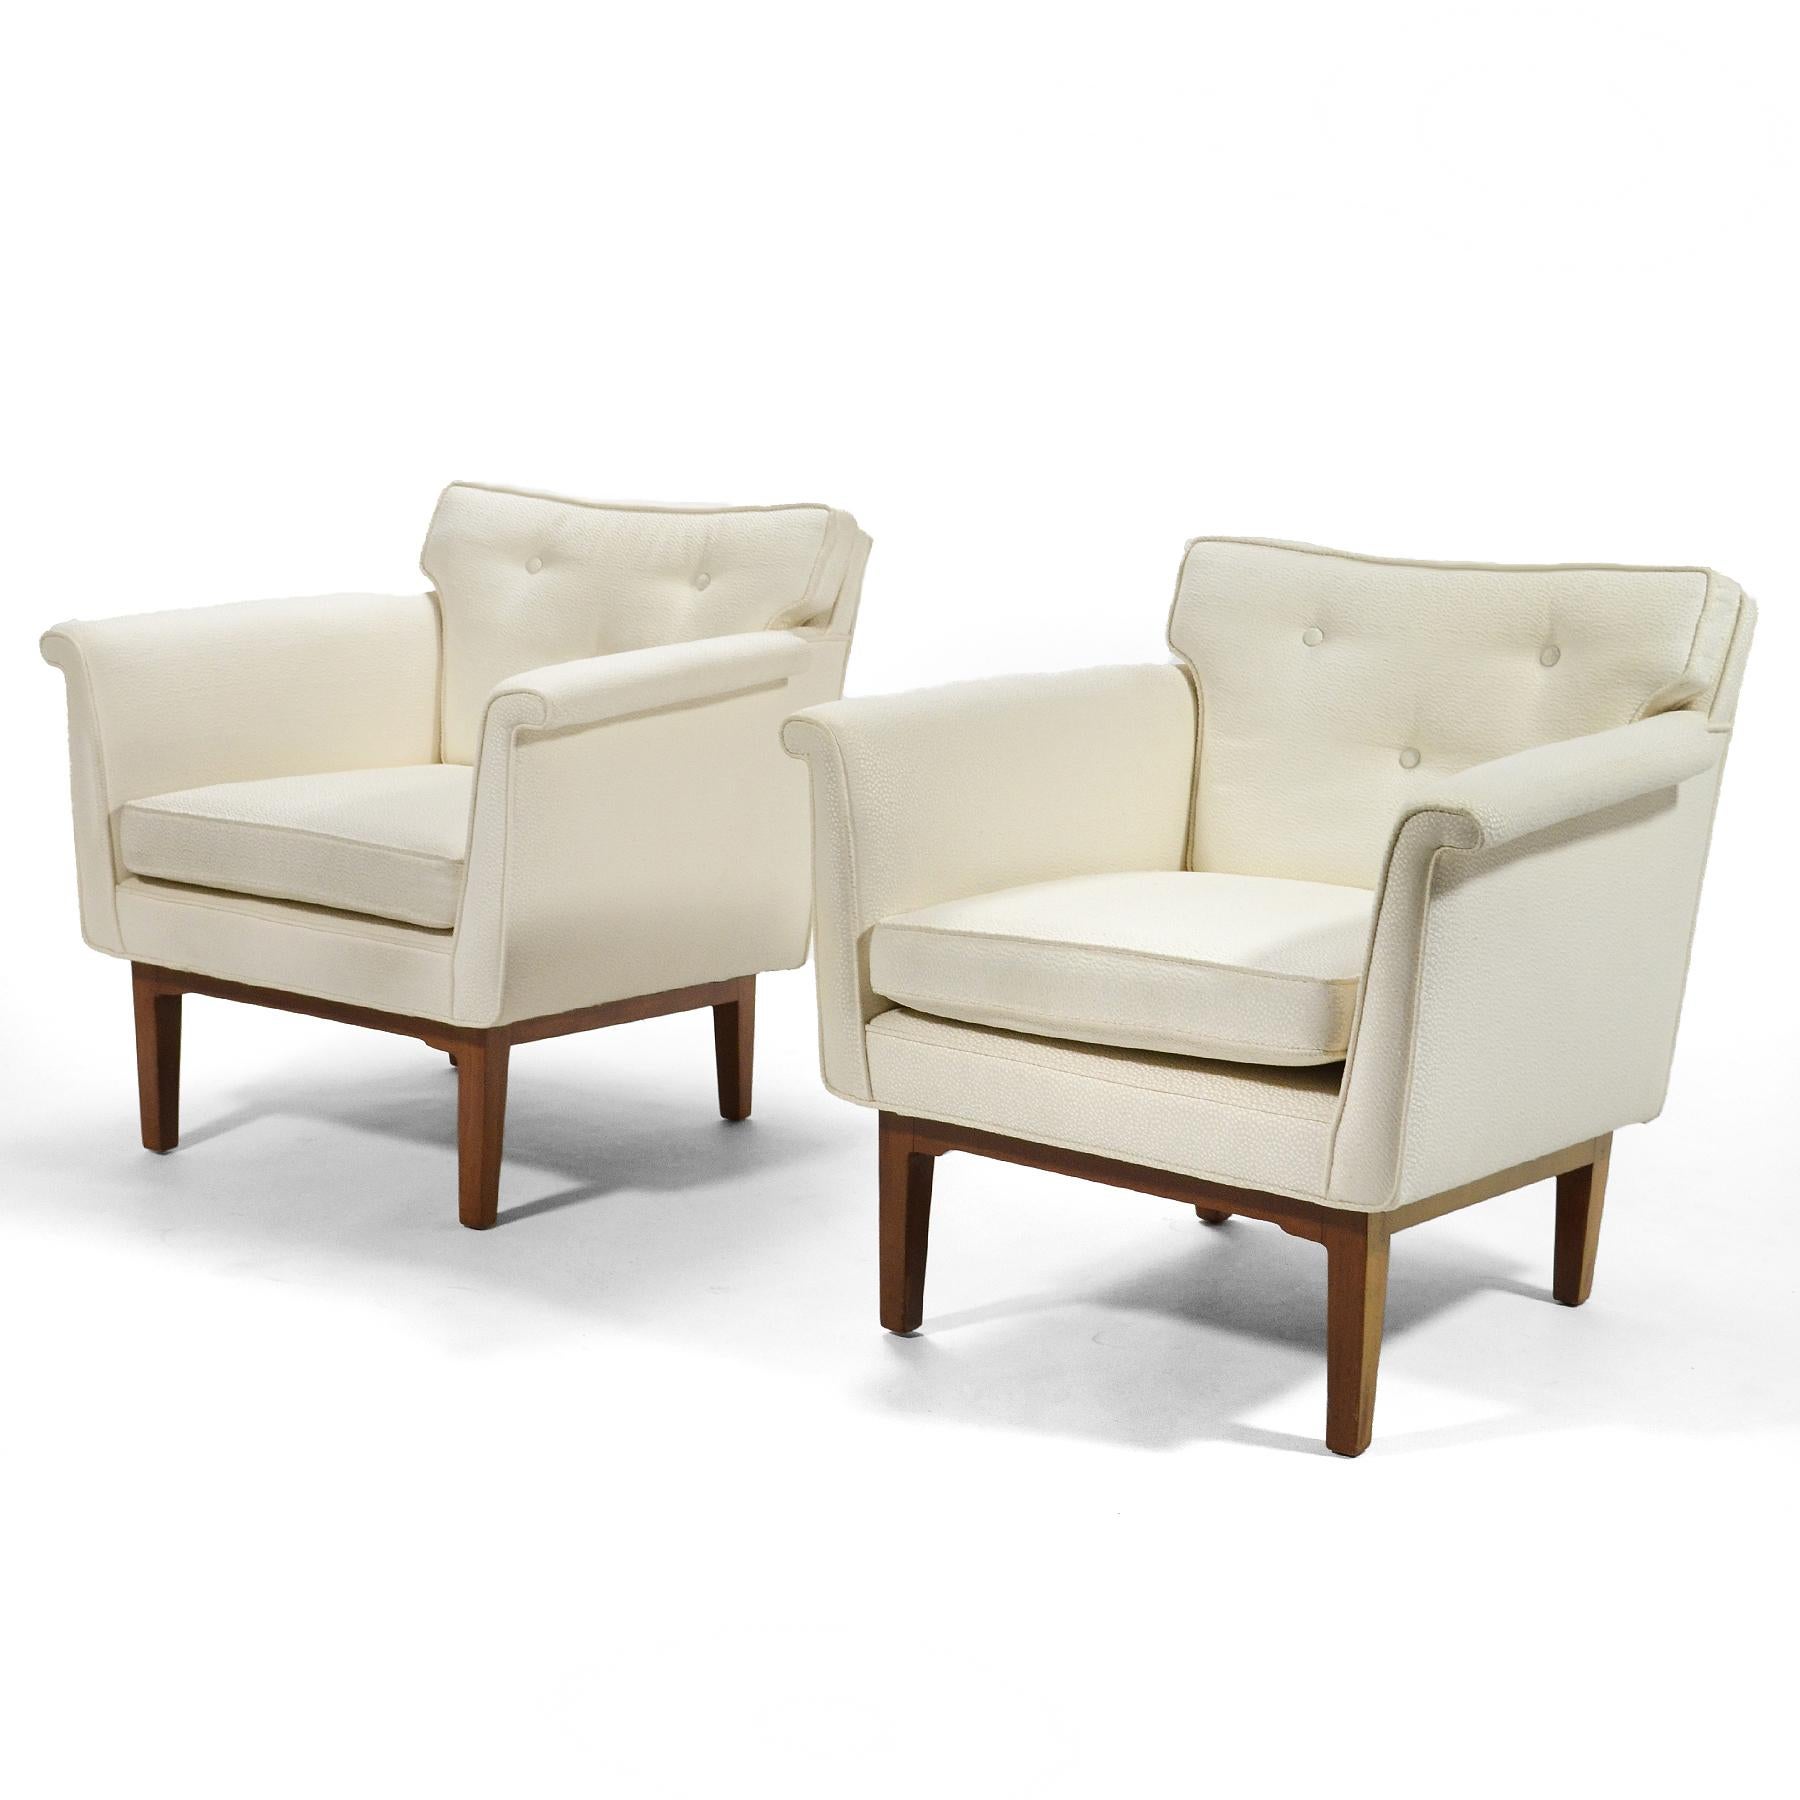 American Edward Wormley Pair of Lounge Chairs by Dunbar